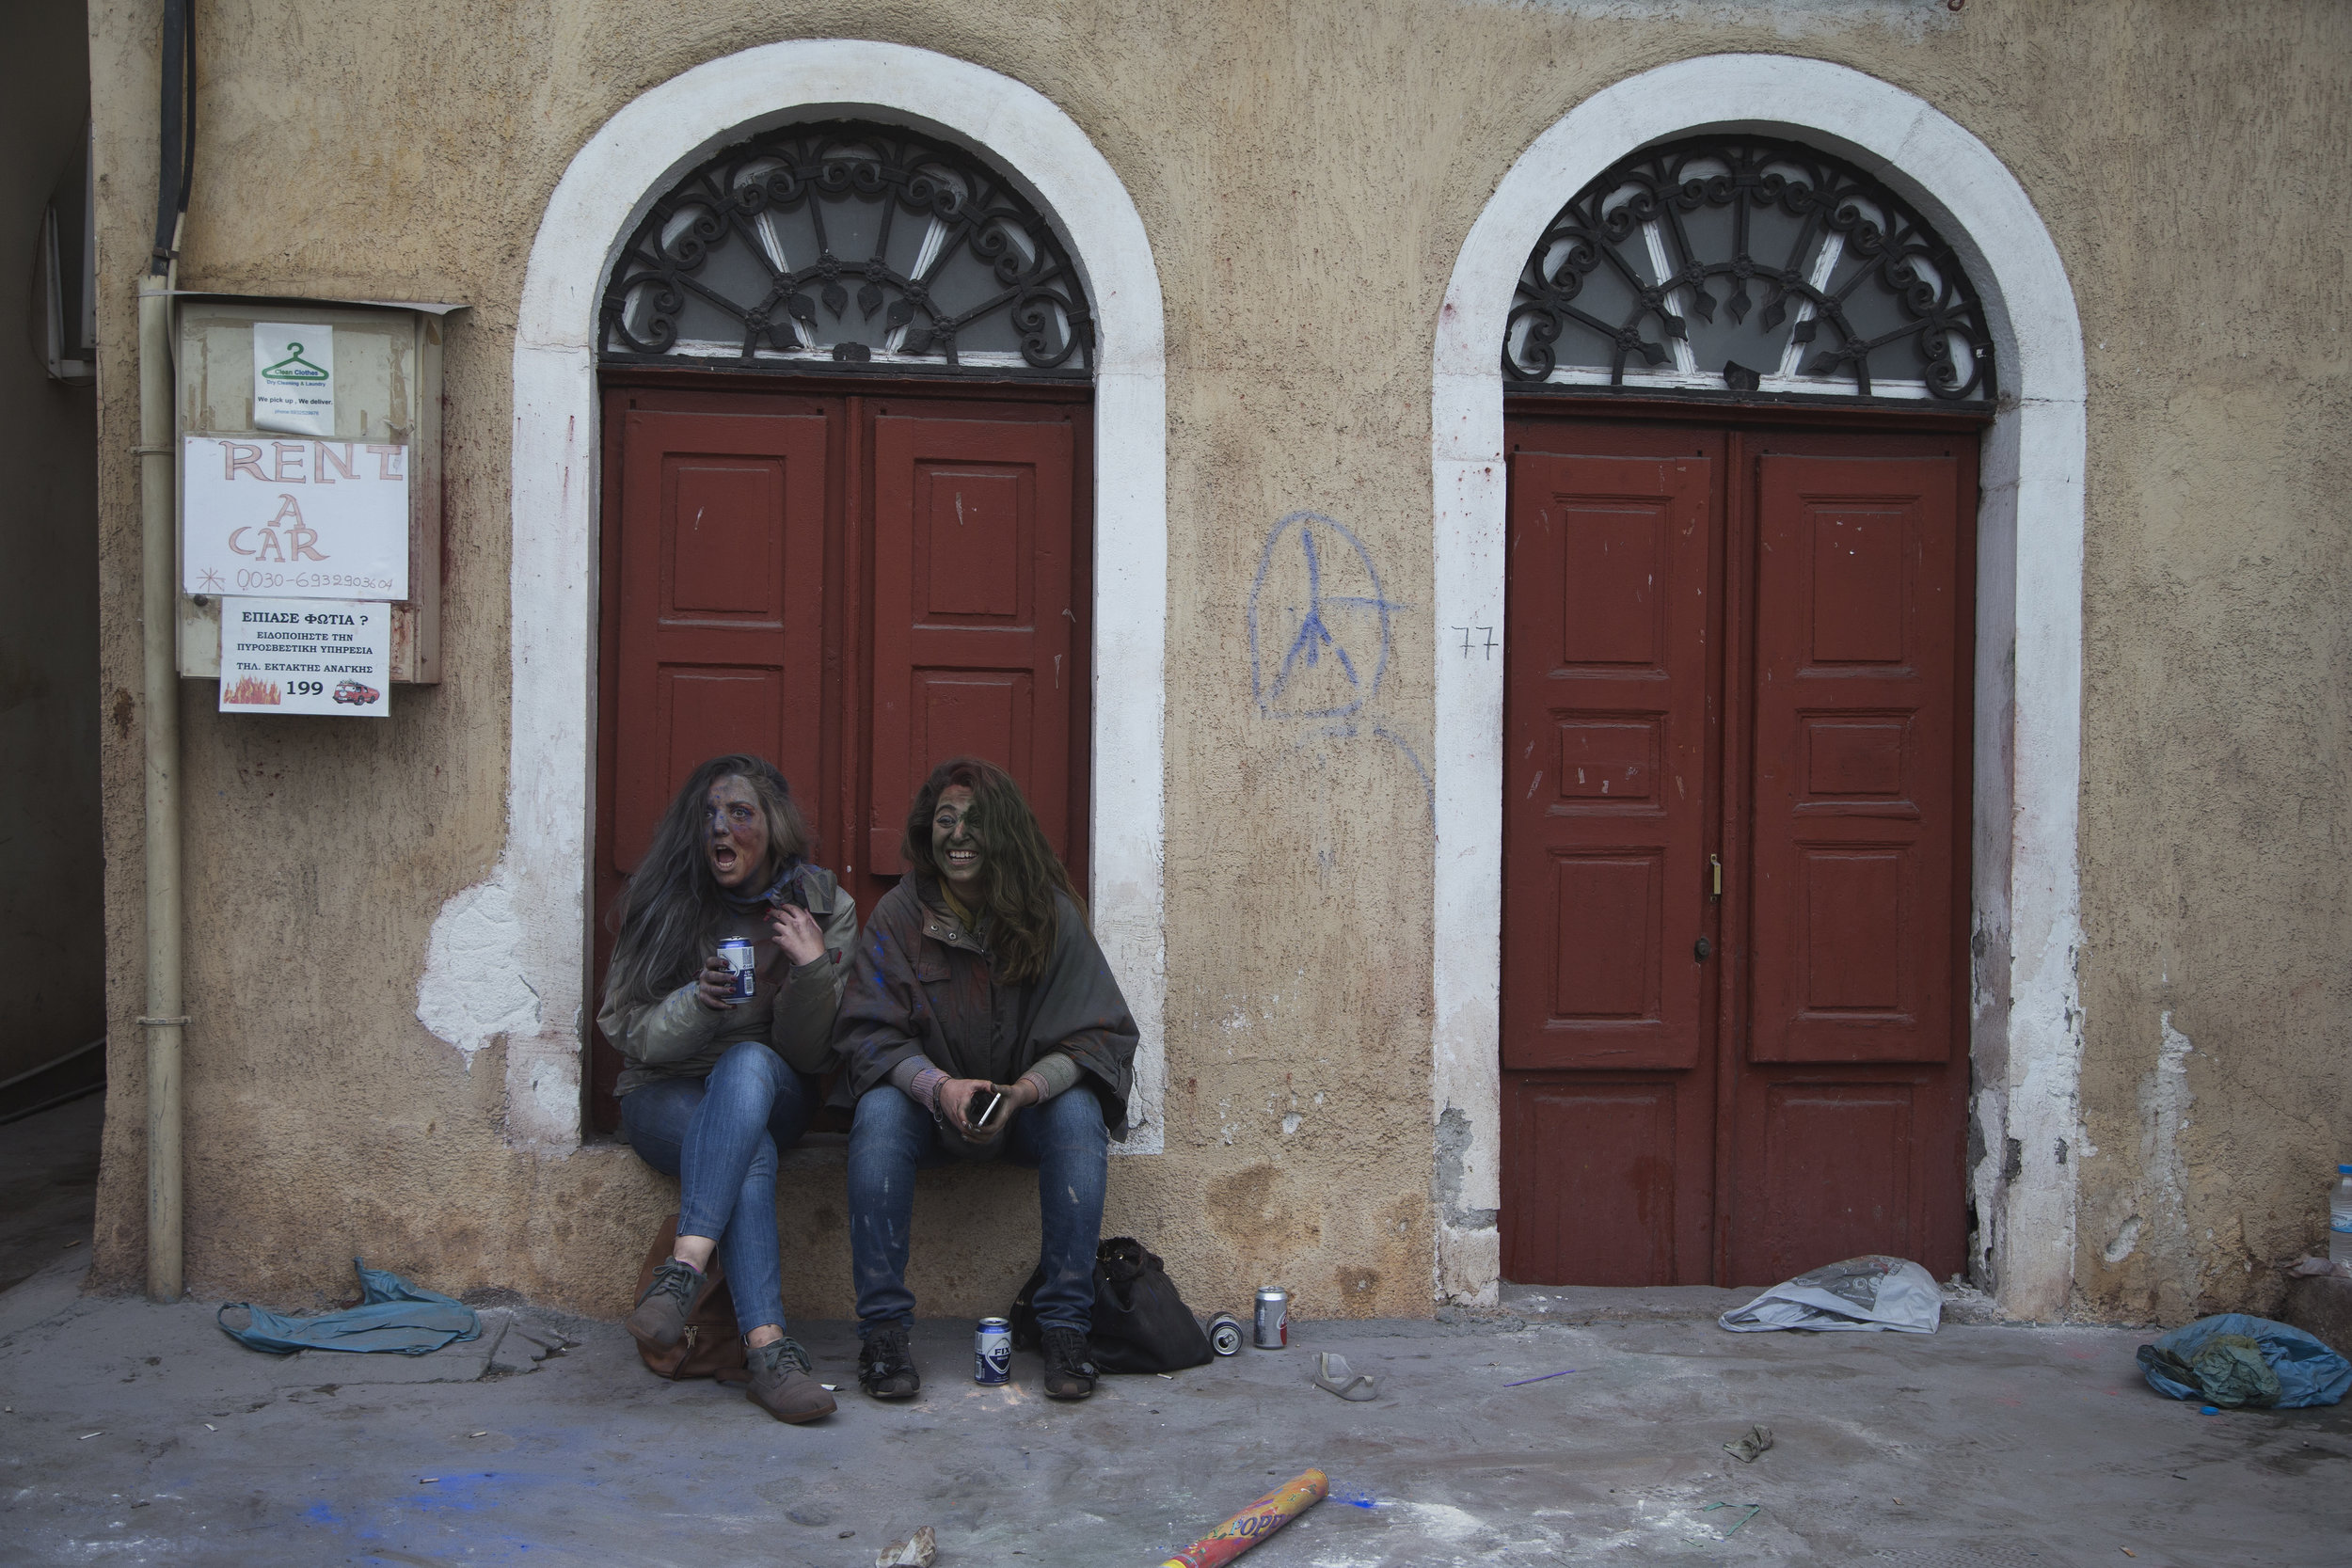  In this Monday, Feb. 19, 2018 photo, twin sisters sit outside a house as they watch revelers taking part in the flour war, a unique colorful flour fight marking the end of the carnival season in the port town of Galaxidi, some 200 kilometers (120 mi